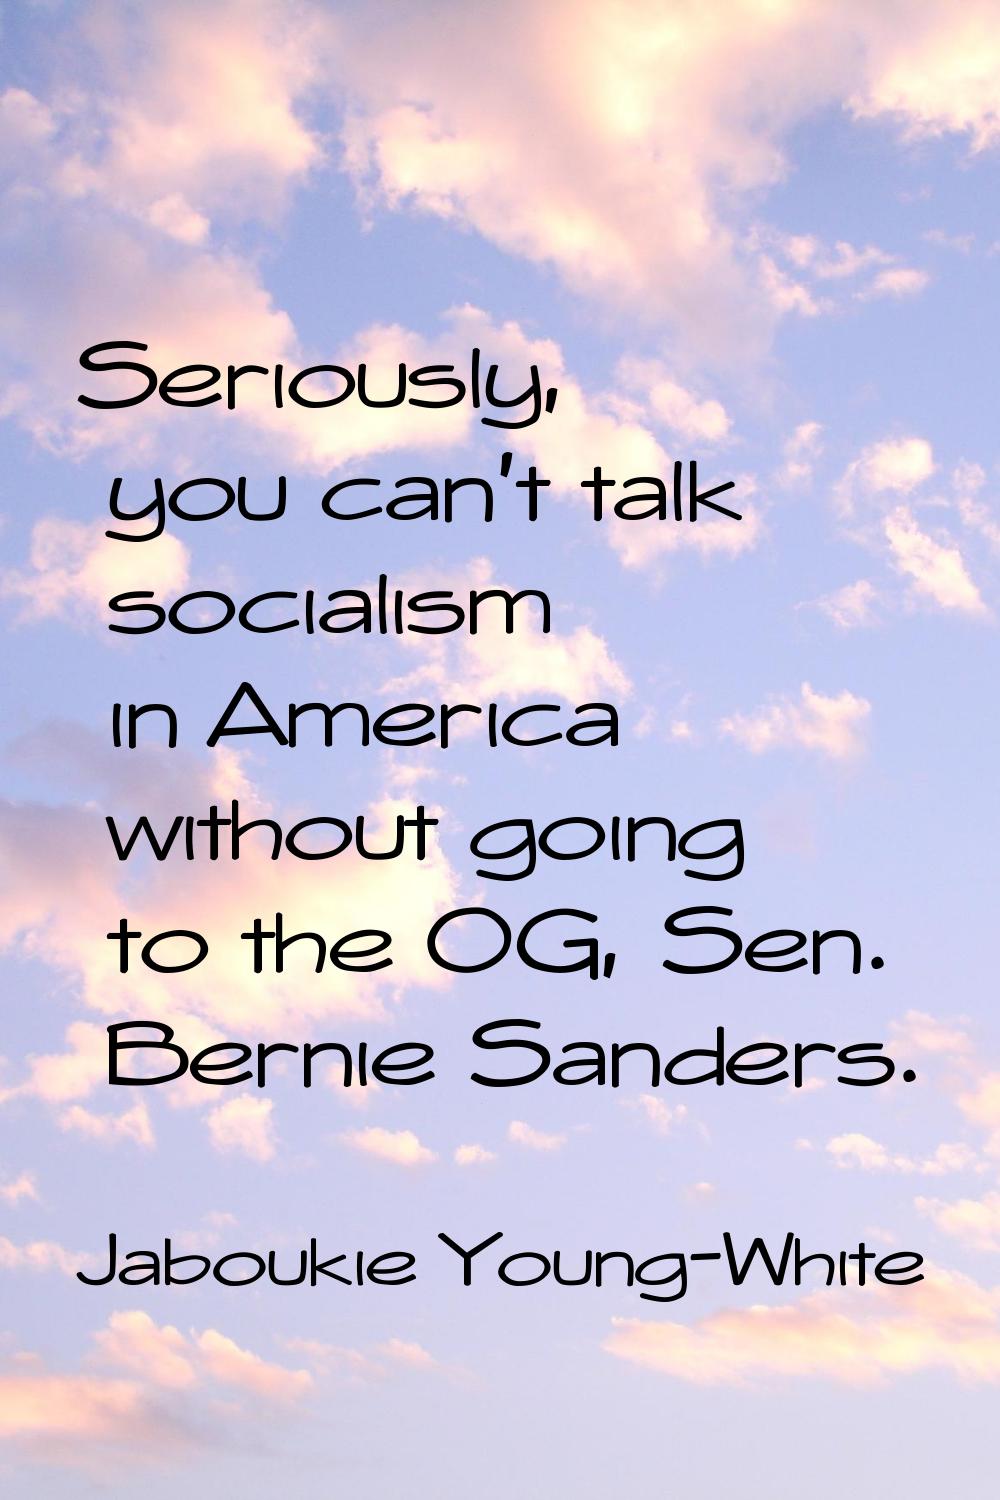 Seriously, you can't talk socialism in America without going to the OG, Sen. Bernie Sanders.